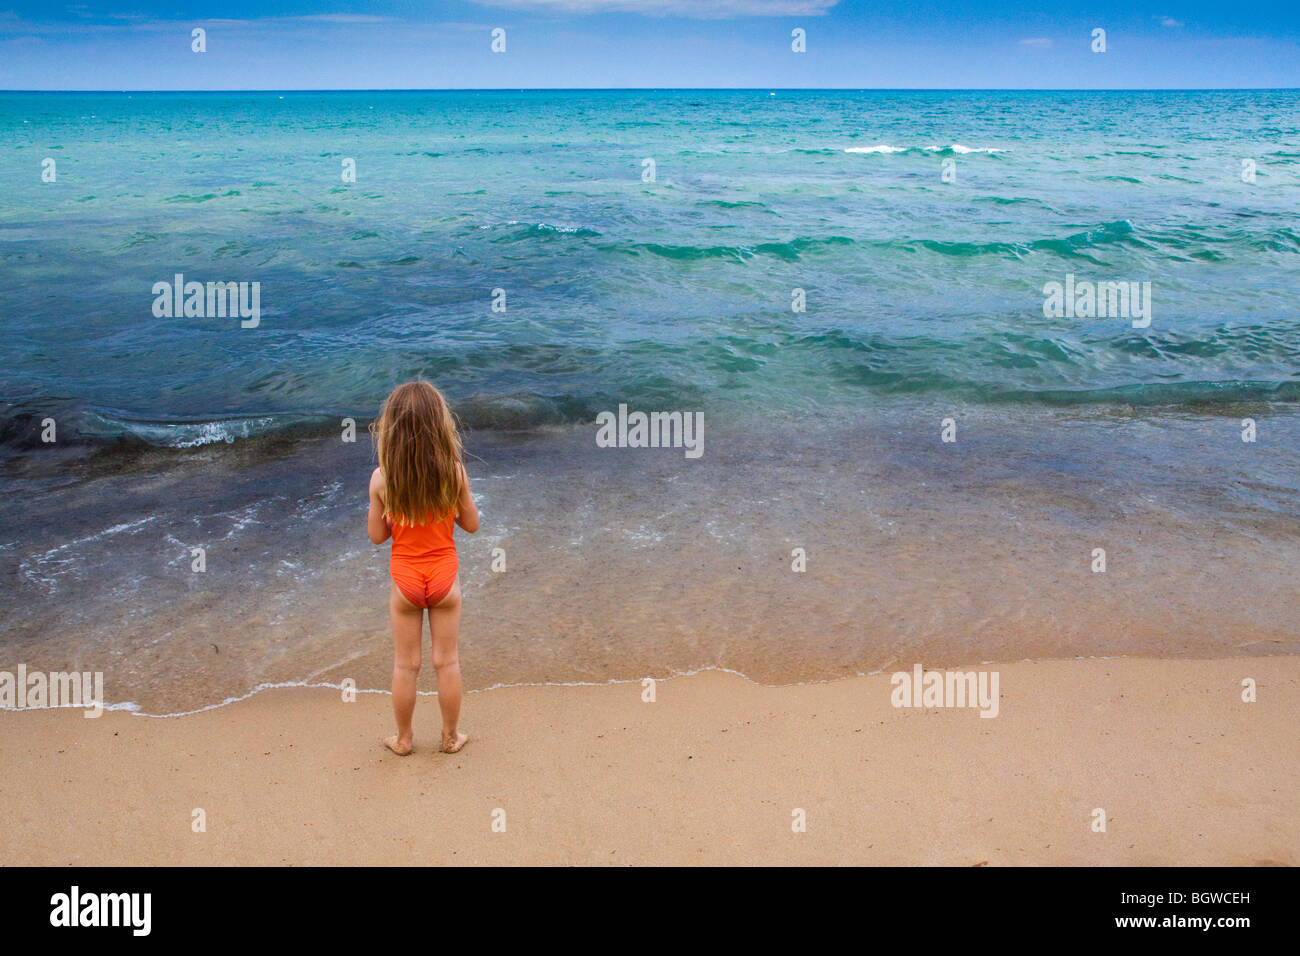 Young girl in swimsuit with long hair waits on beach, looking out to sea Stock Photo